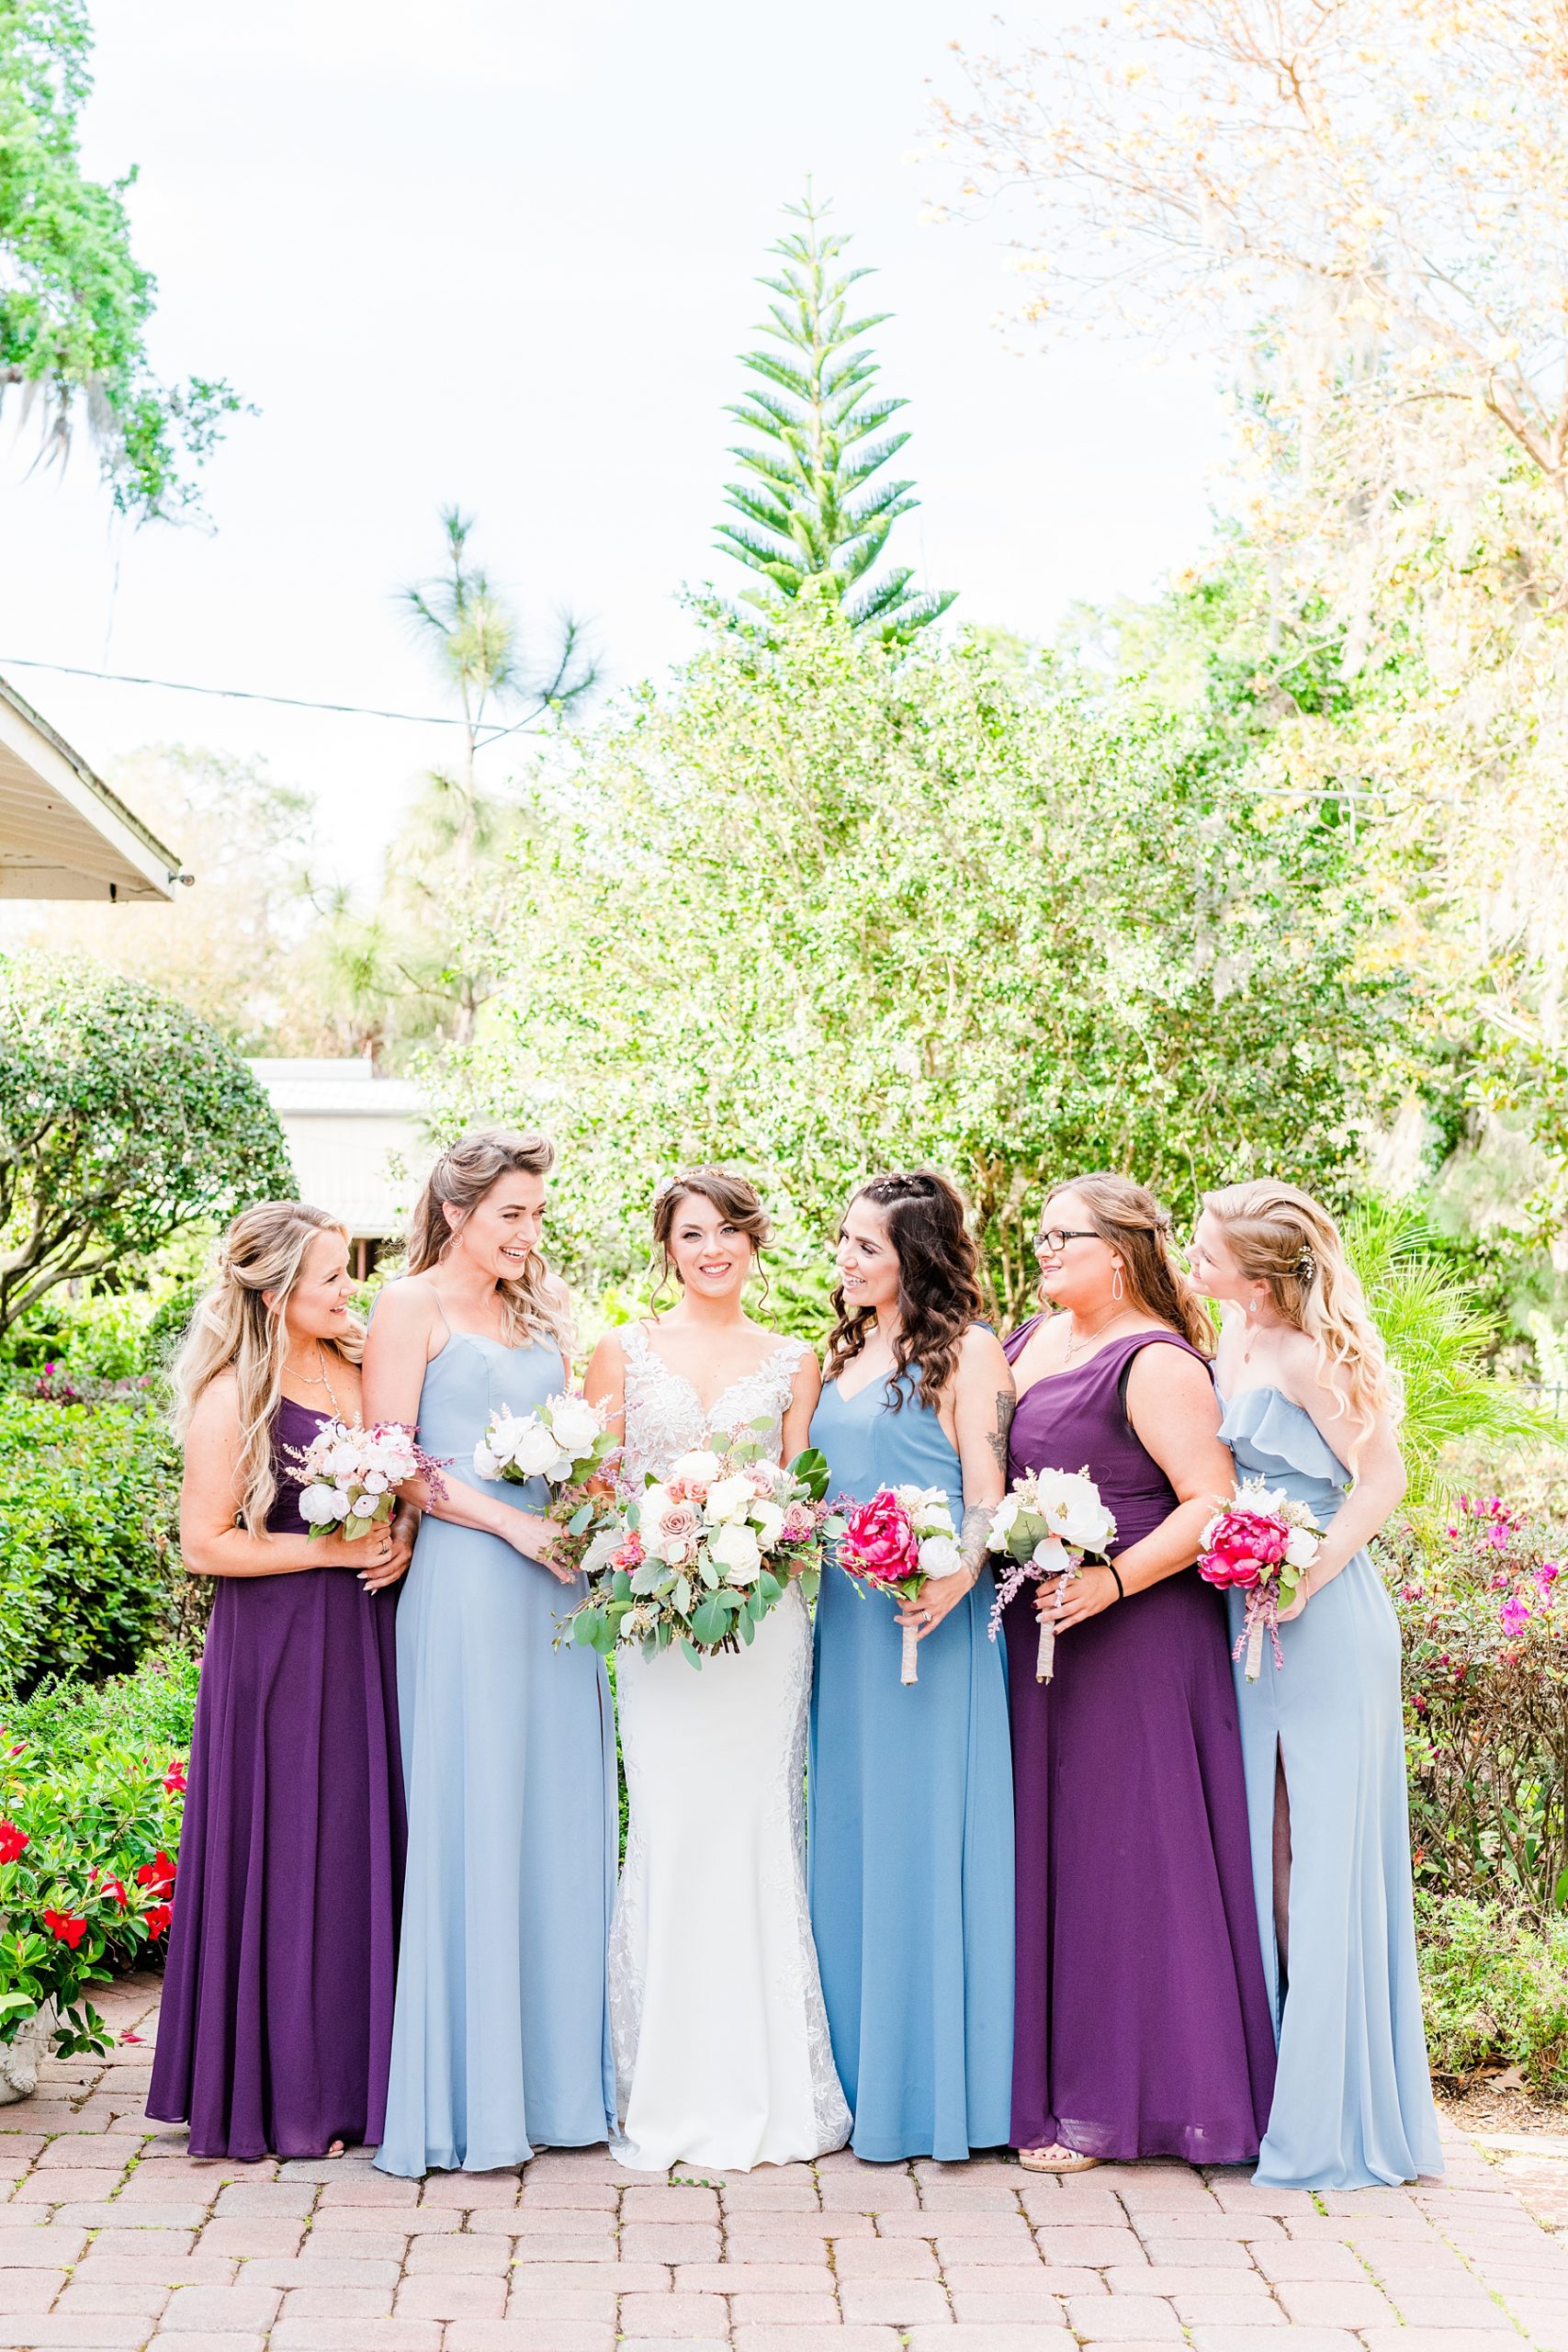 Blue Bridesmaid dresses | Town Manor | Chynna Pacheco Photography